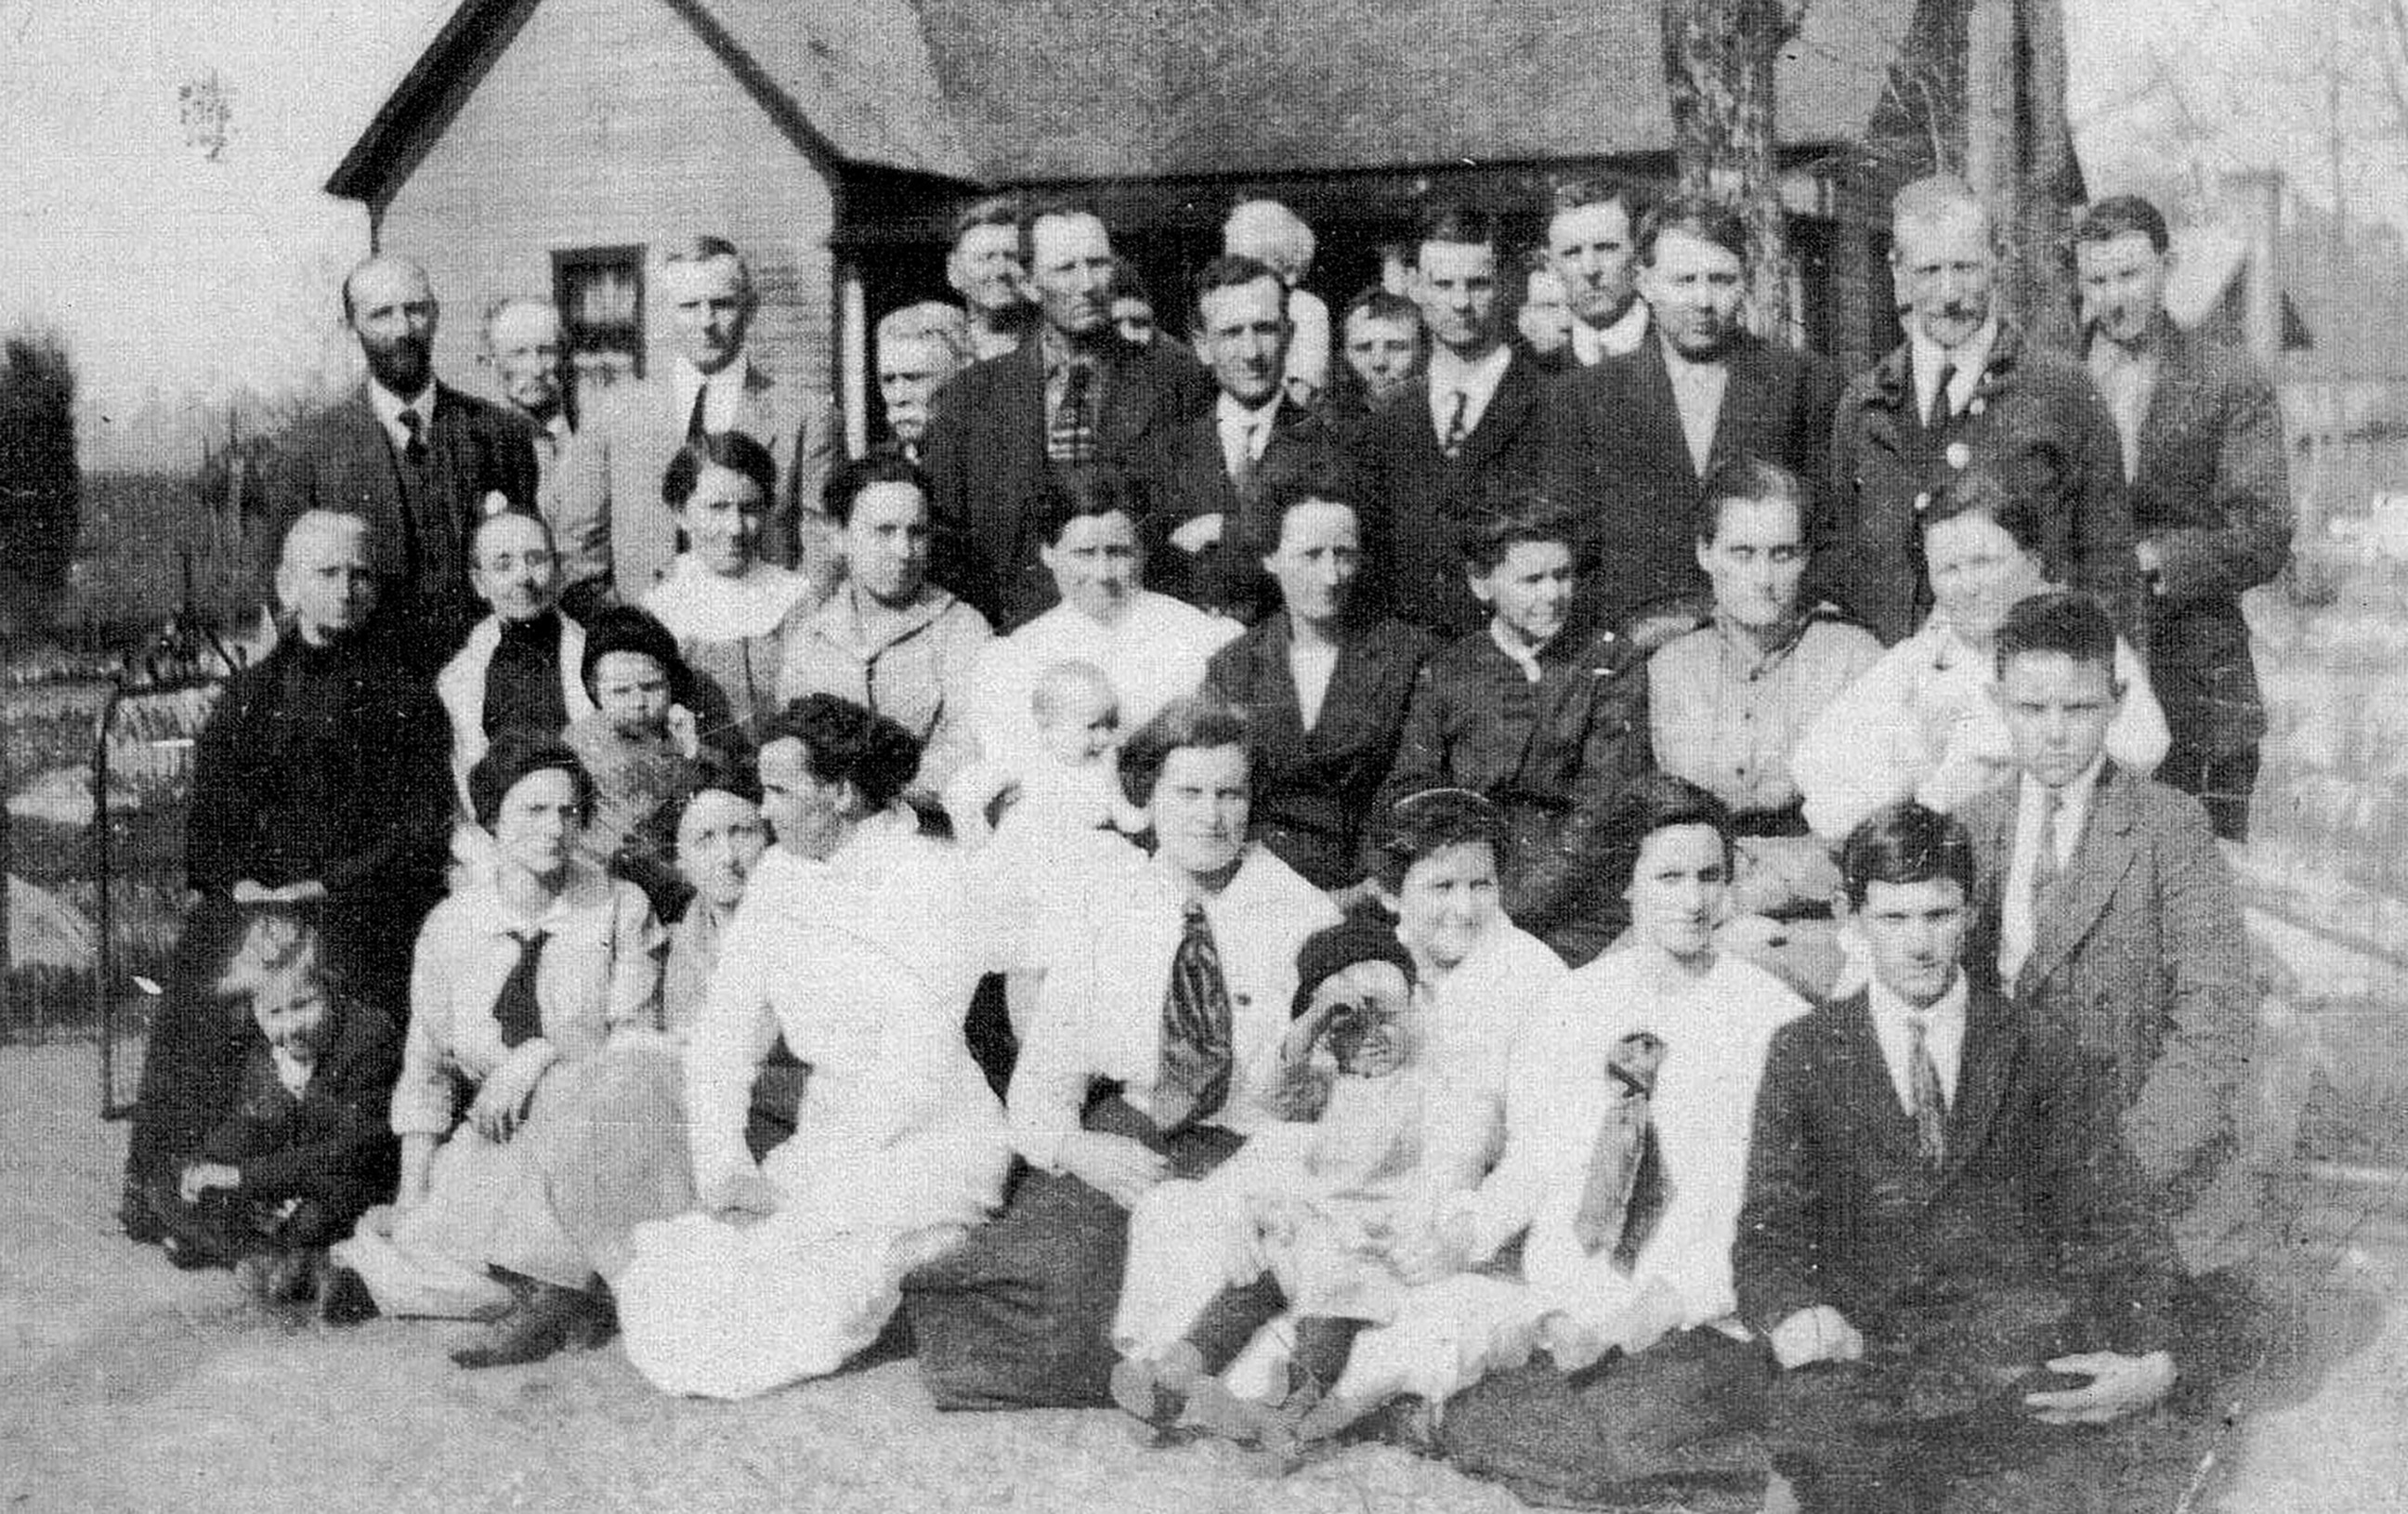 PHOTO: A group photo at a 2x2 Church convention in the early 1900s. 